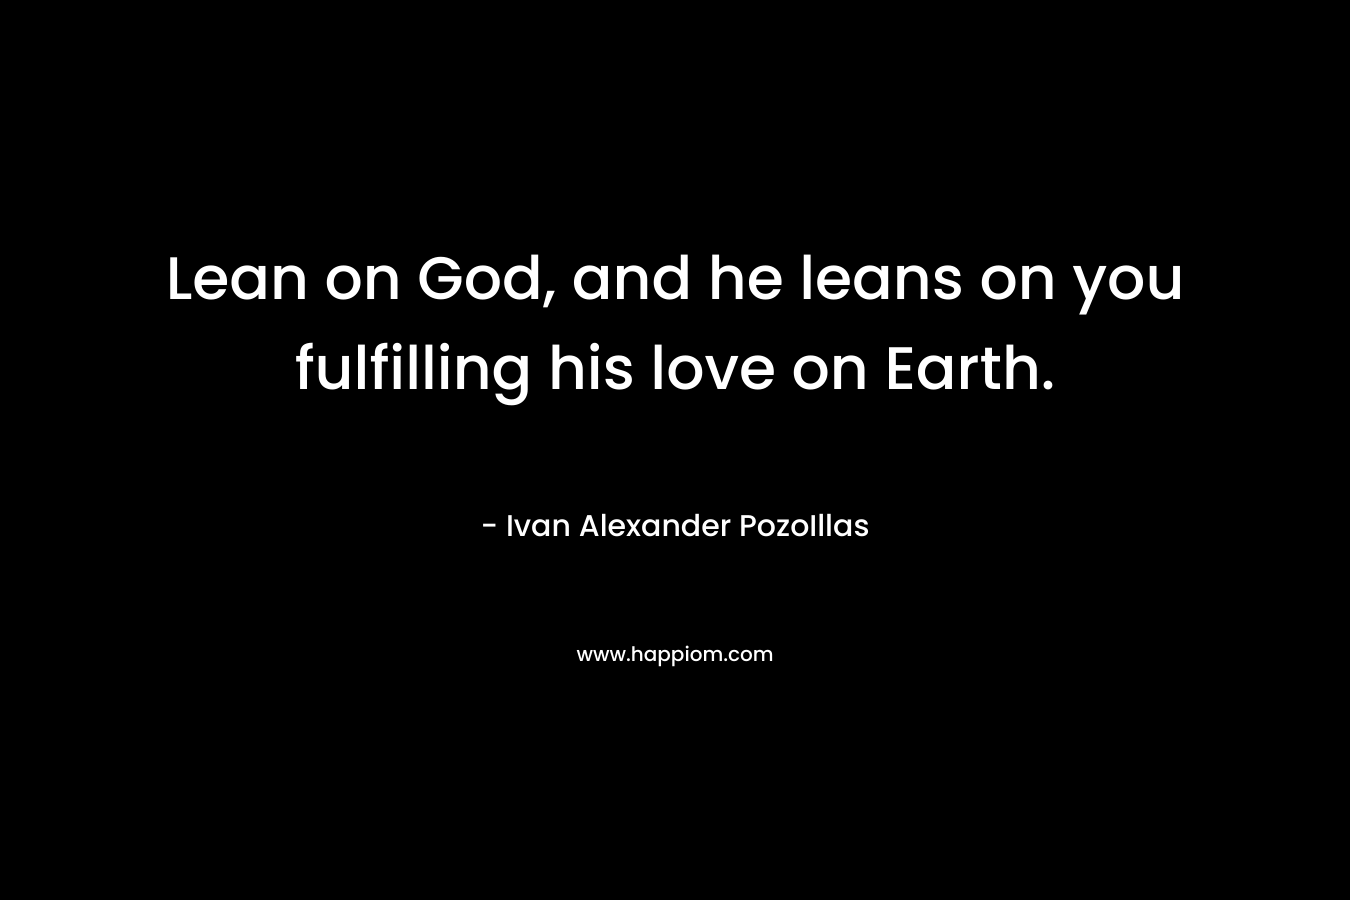 Lean on God, and he leans on you fulfilling his love on Earth. – Ivan Alexander PozoIllas